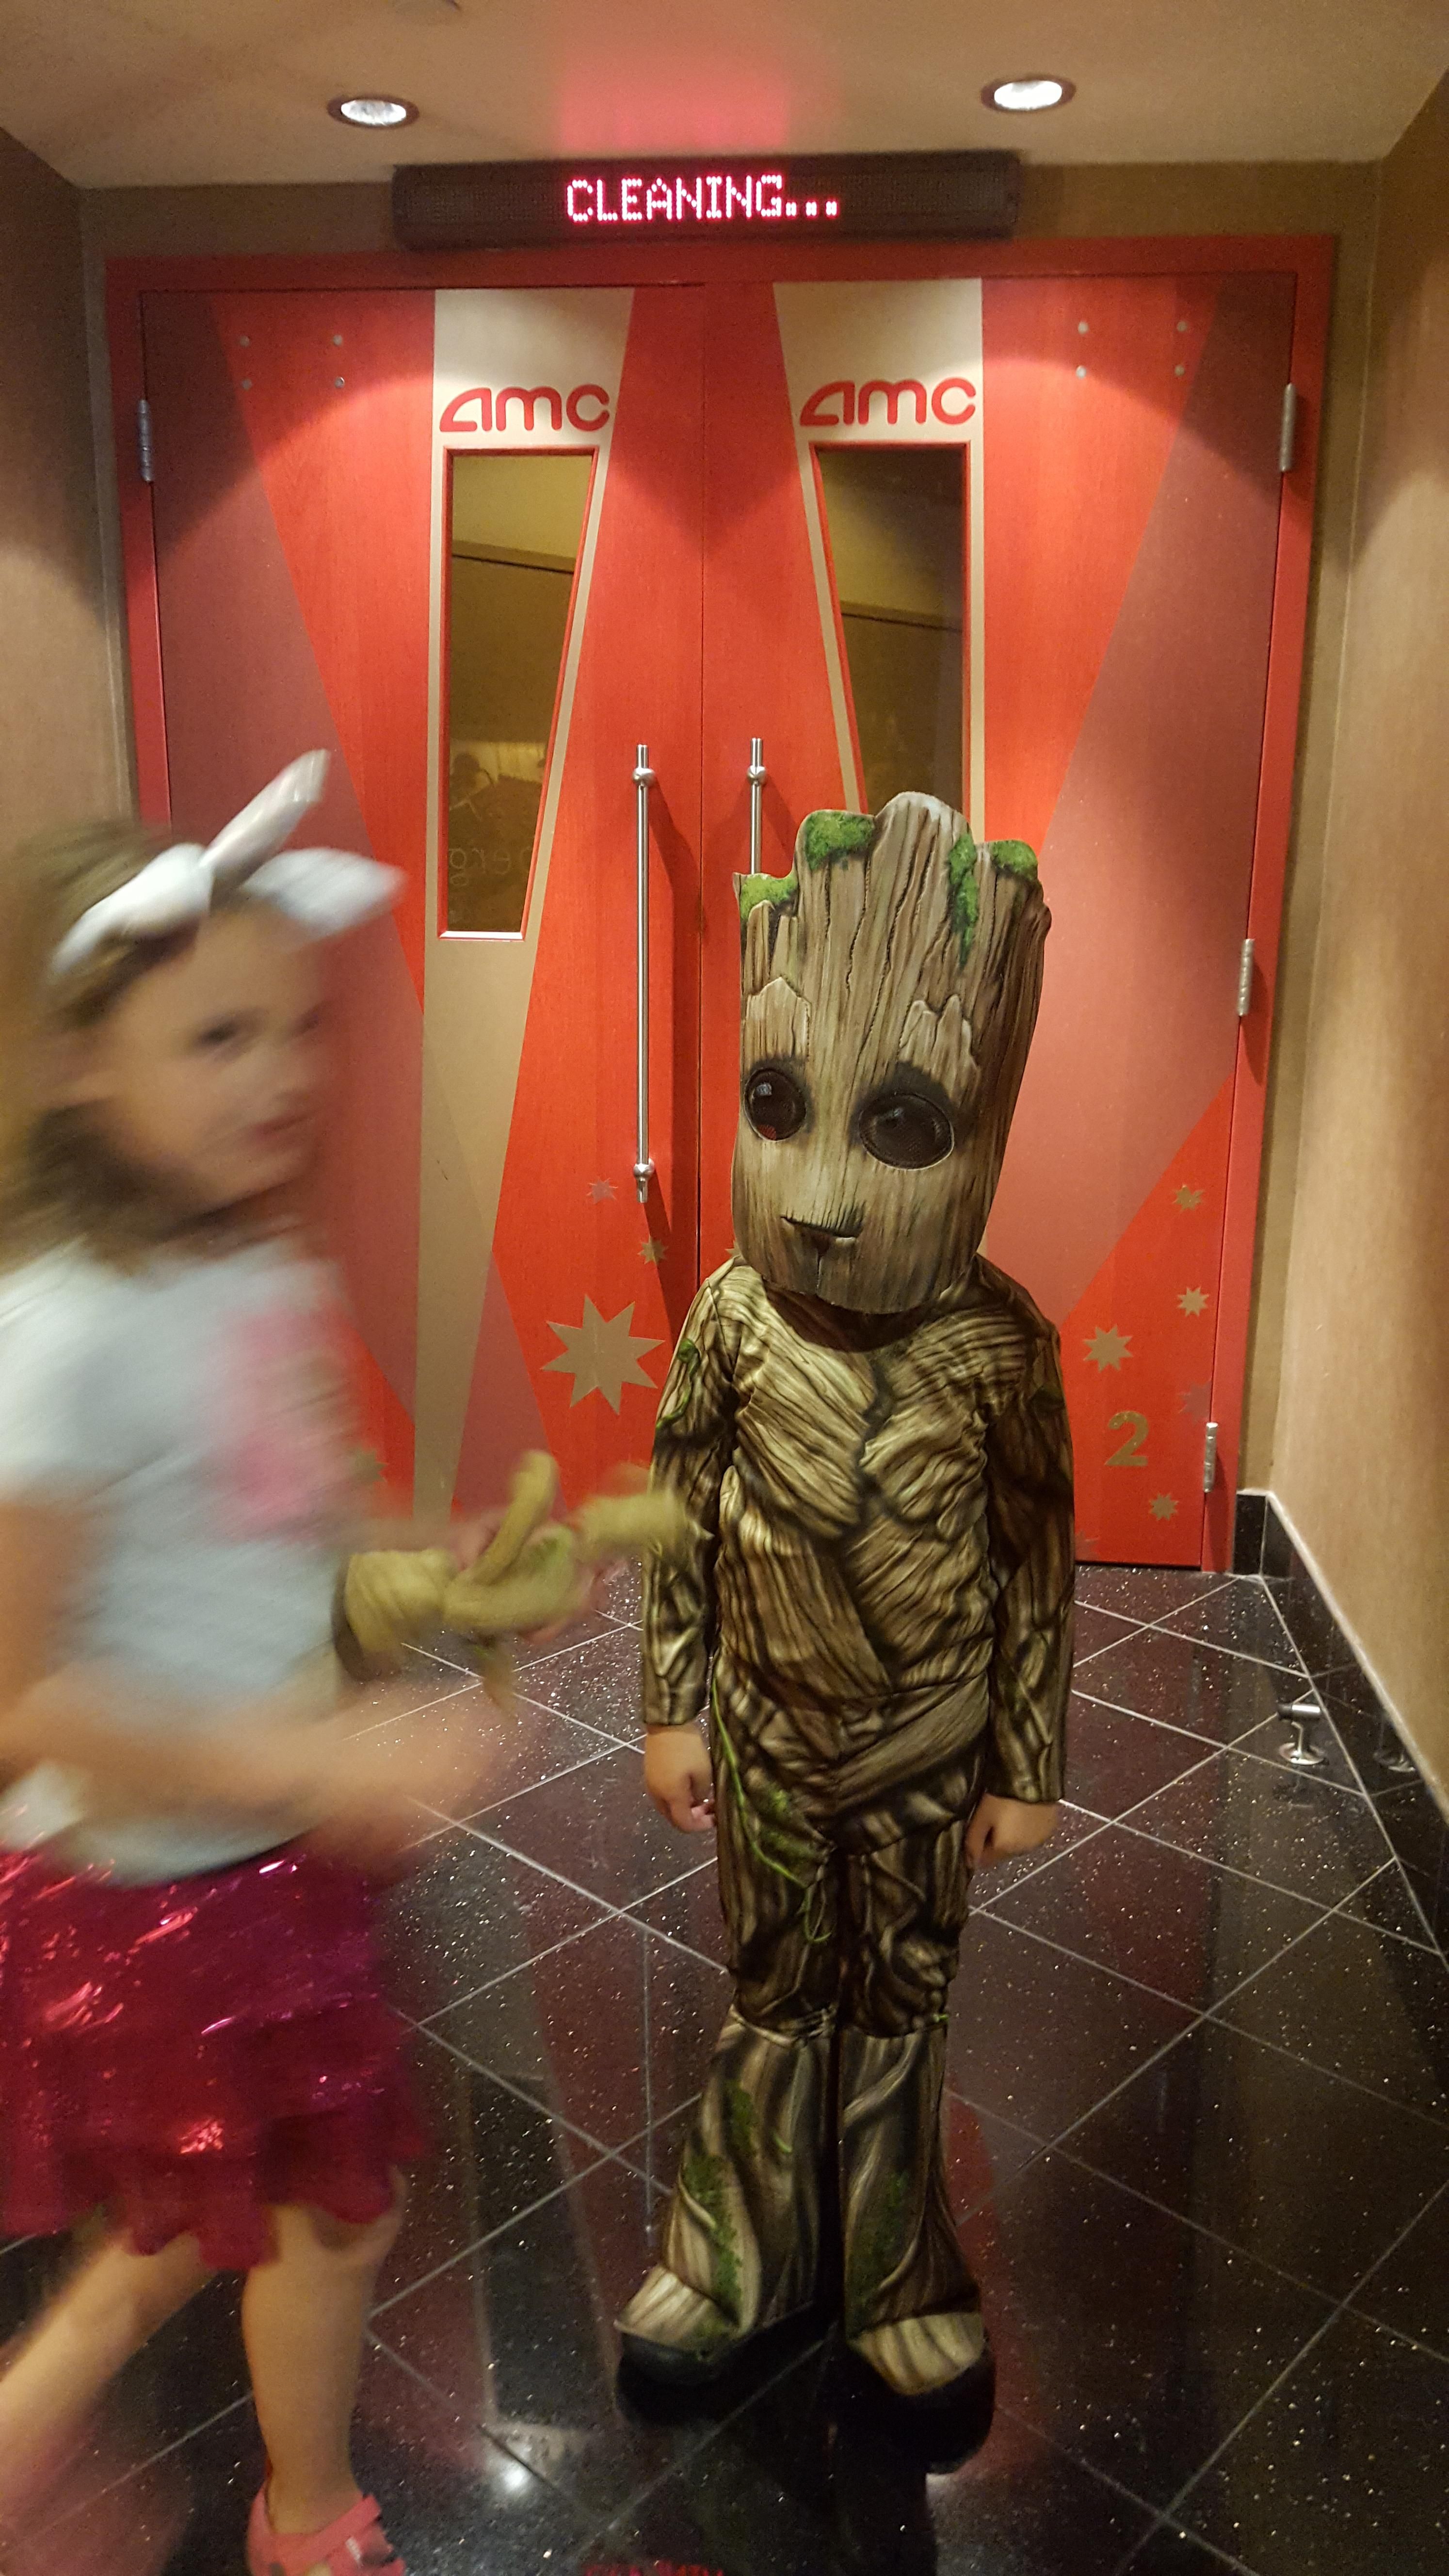 My 5 year old insisted on dressing up as groot to see the new guardians of the galaxy.